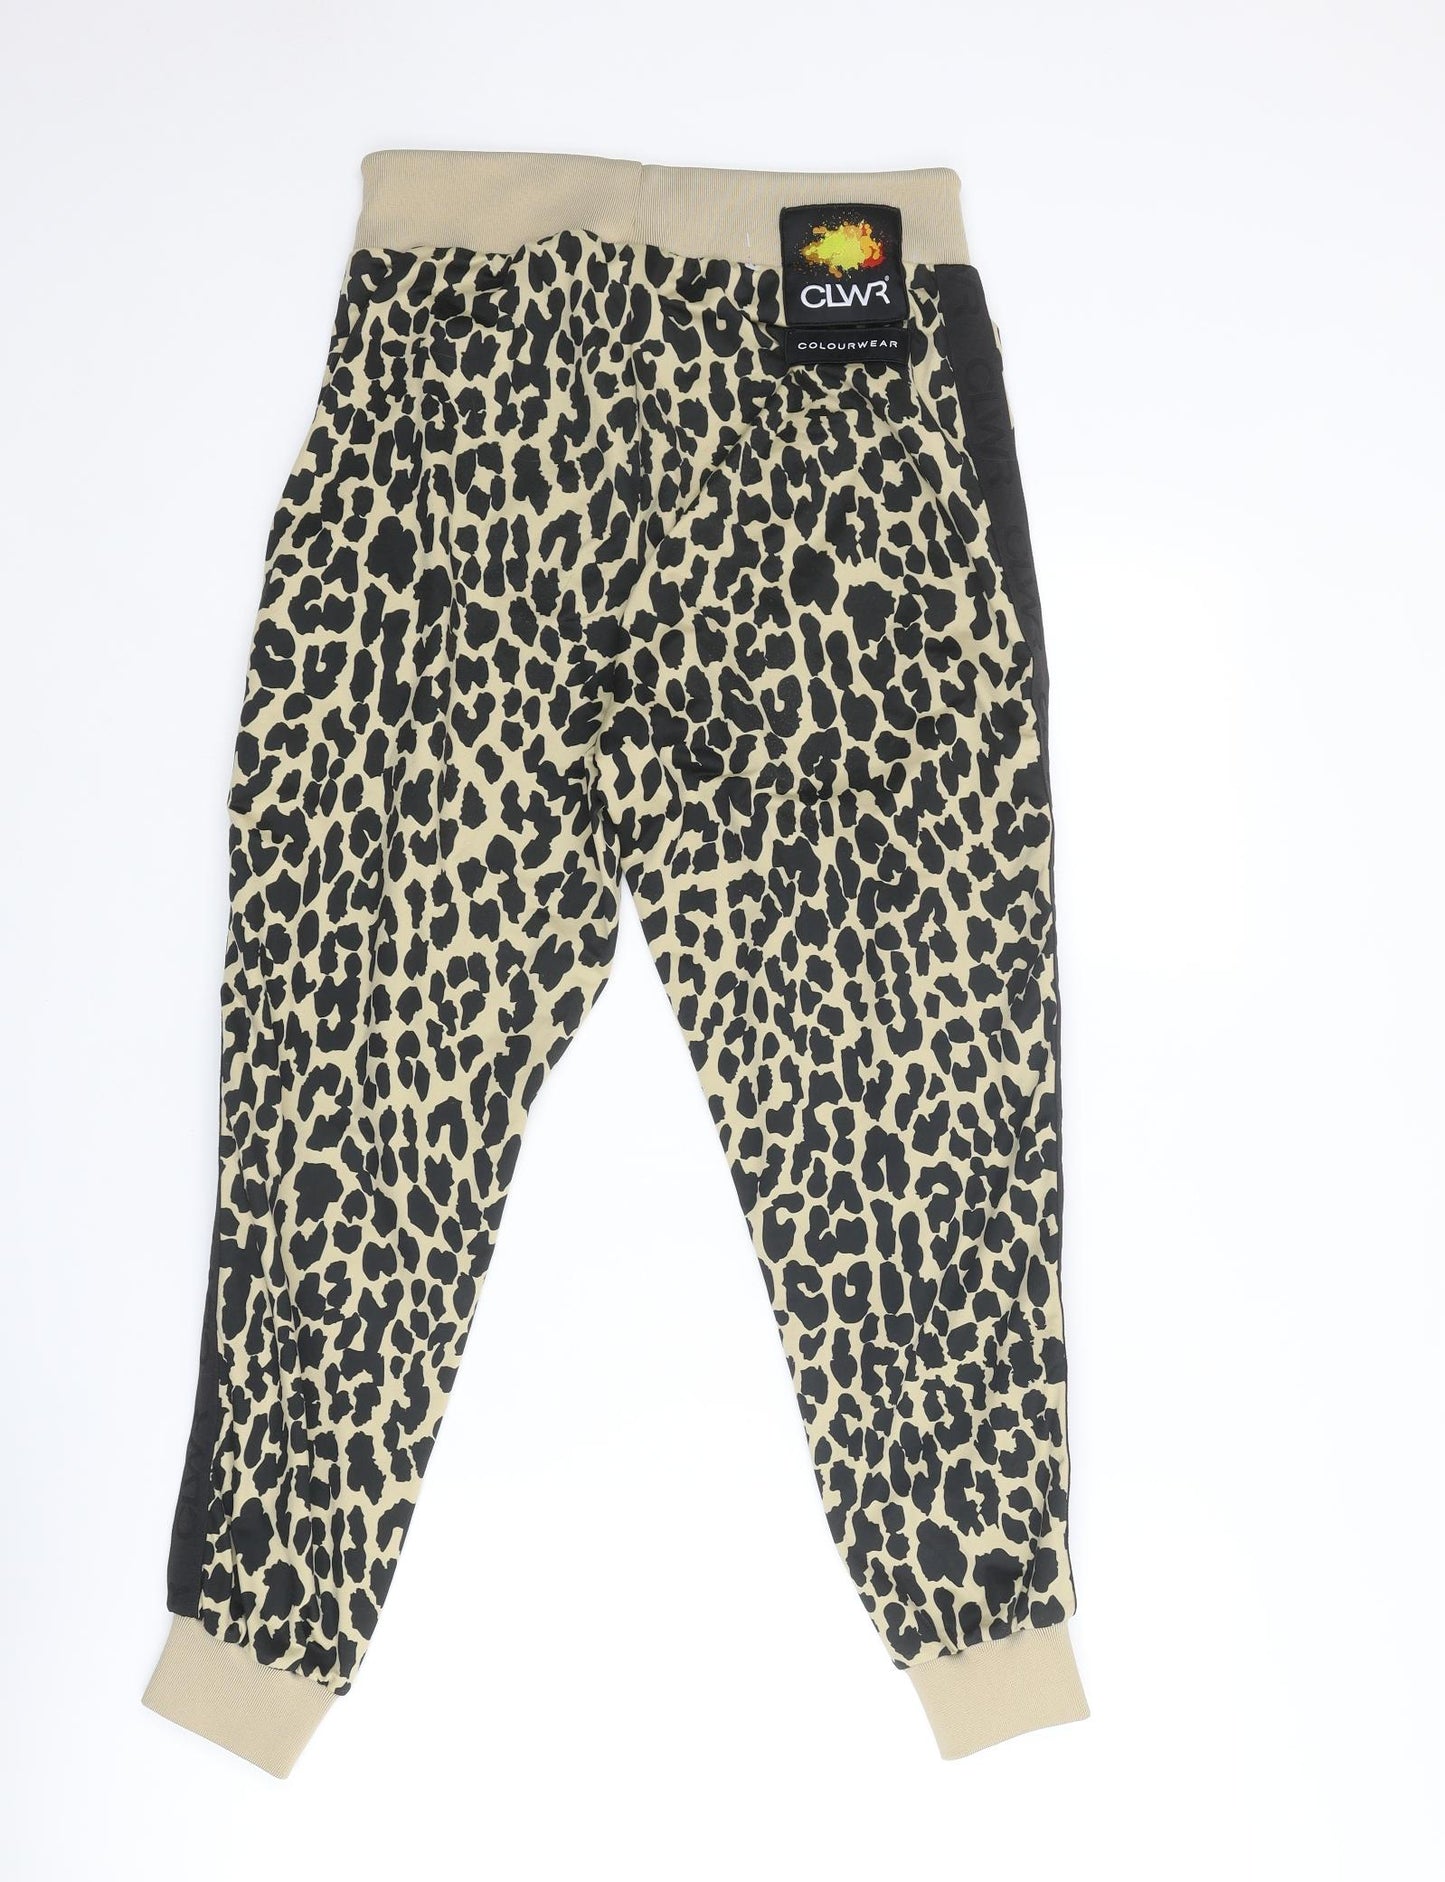 Colourwear Womens Multicoloured Animal Print Polyester Jogger Trousers Size S Regular Drawstring